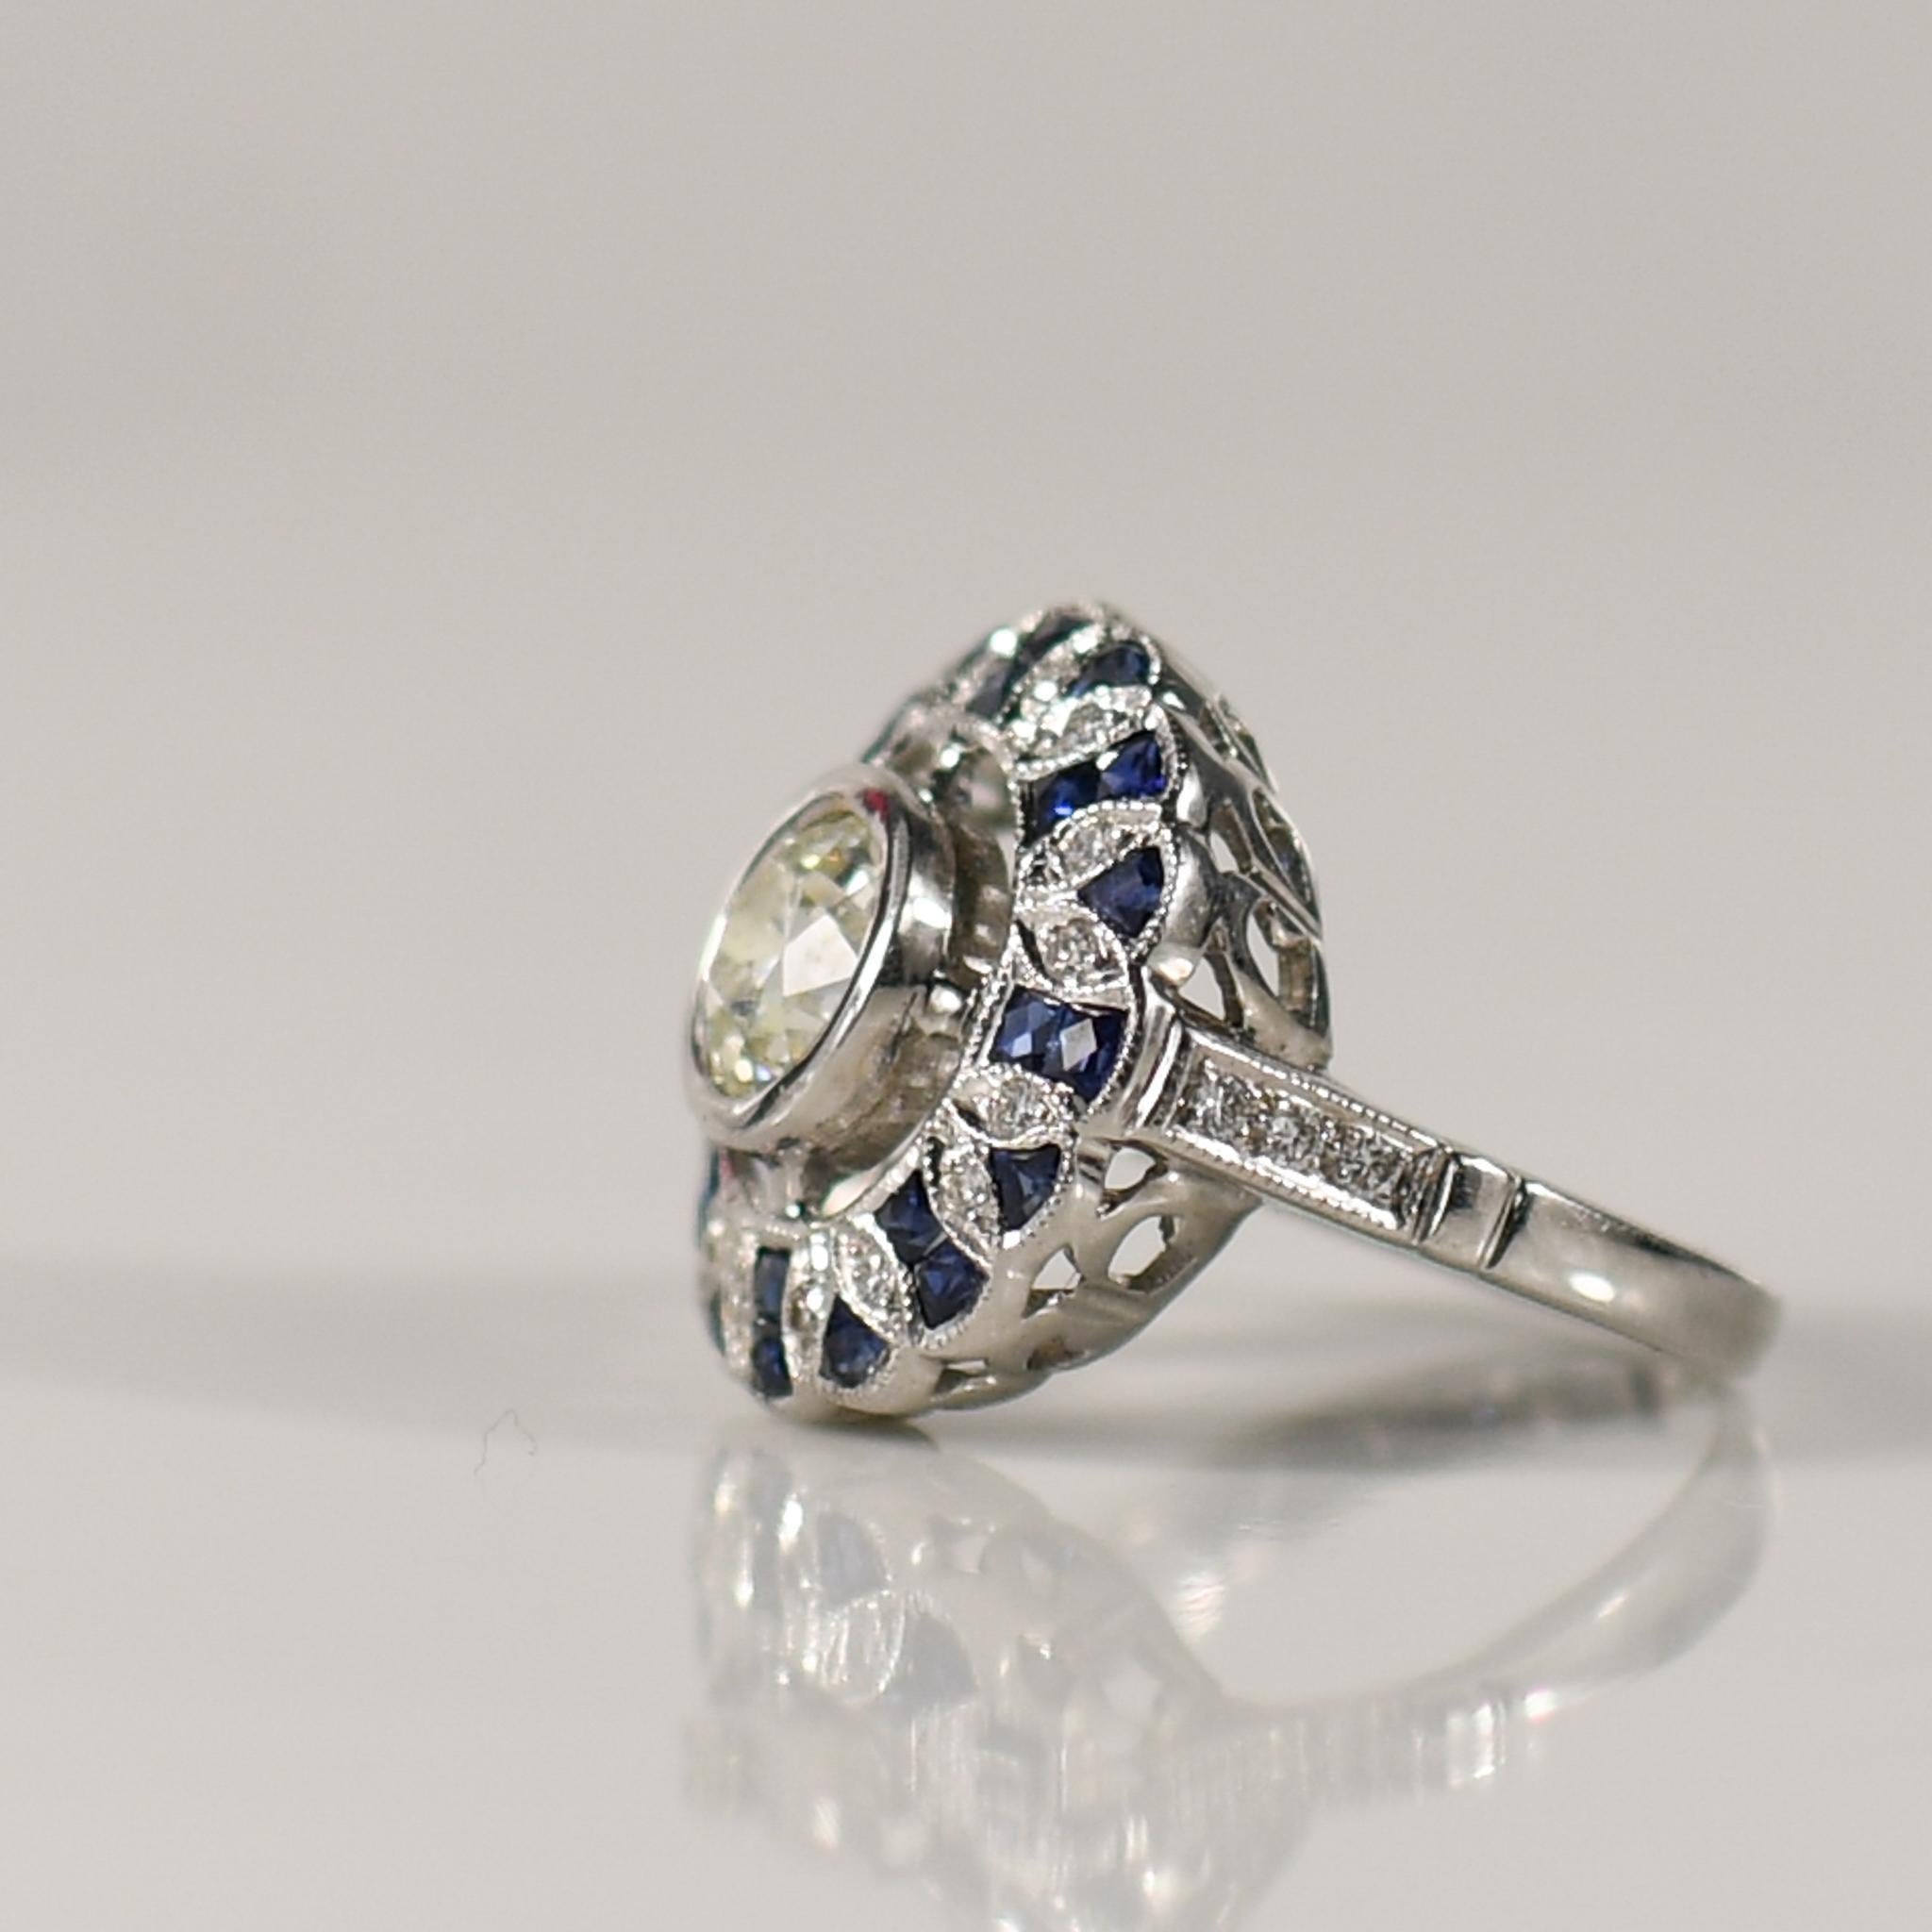 1.38ct Old Euro Diamond Art Deco Inspired Bezel Set Ring Sapphire & Diamond Halo In Good Condition For Sale In Addison, TX